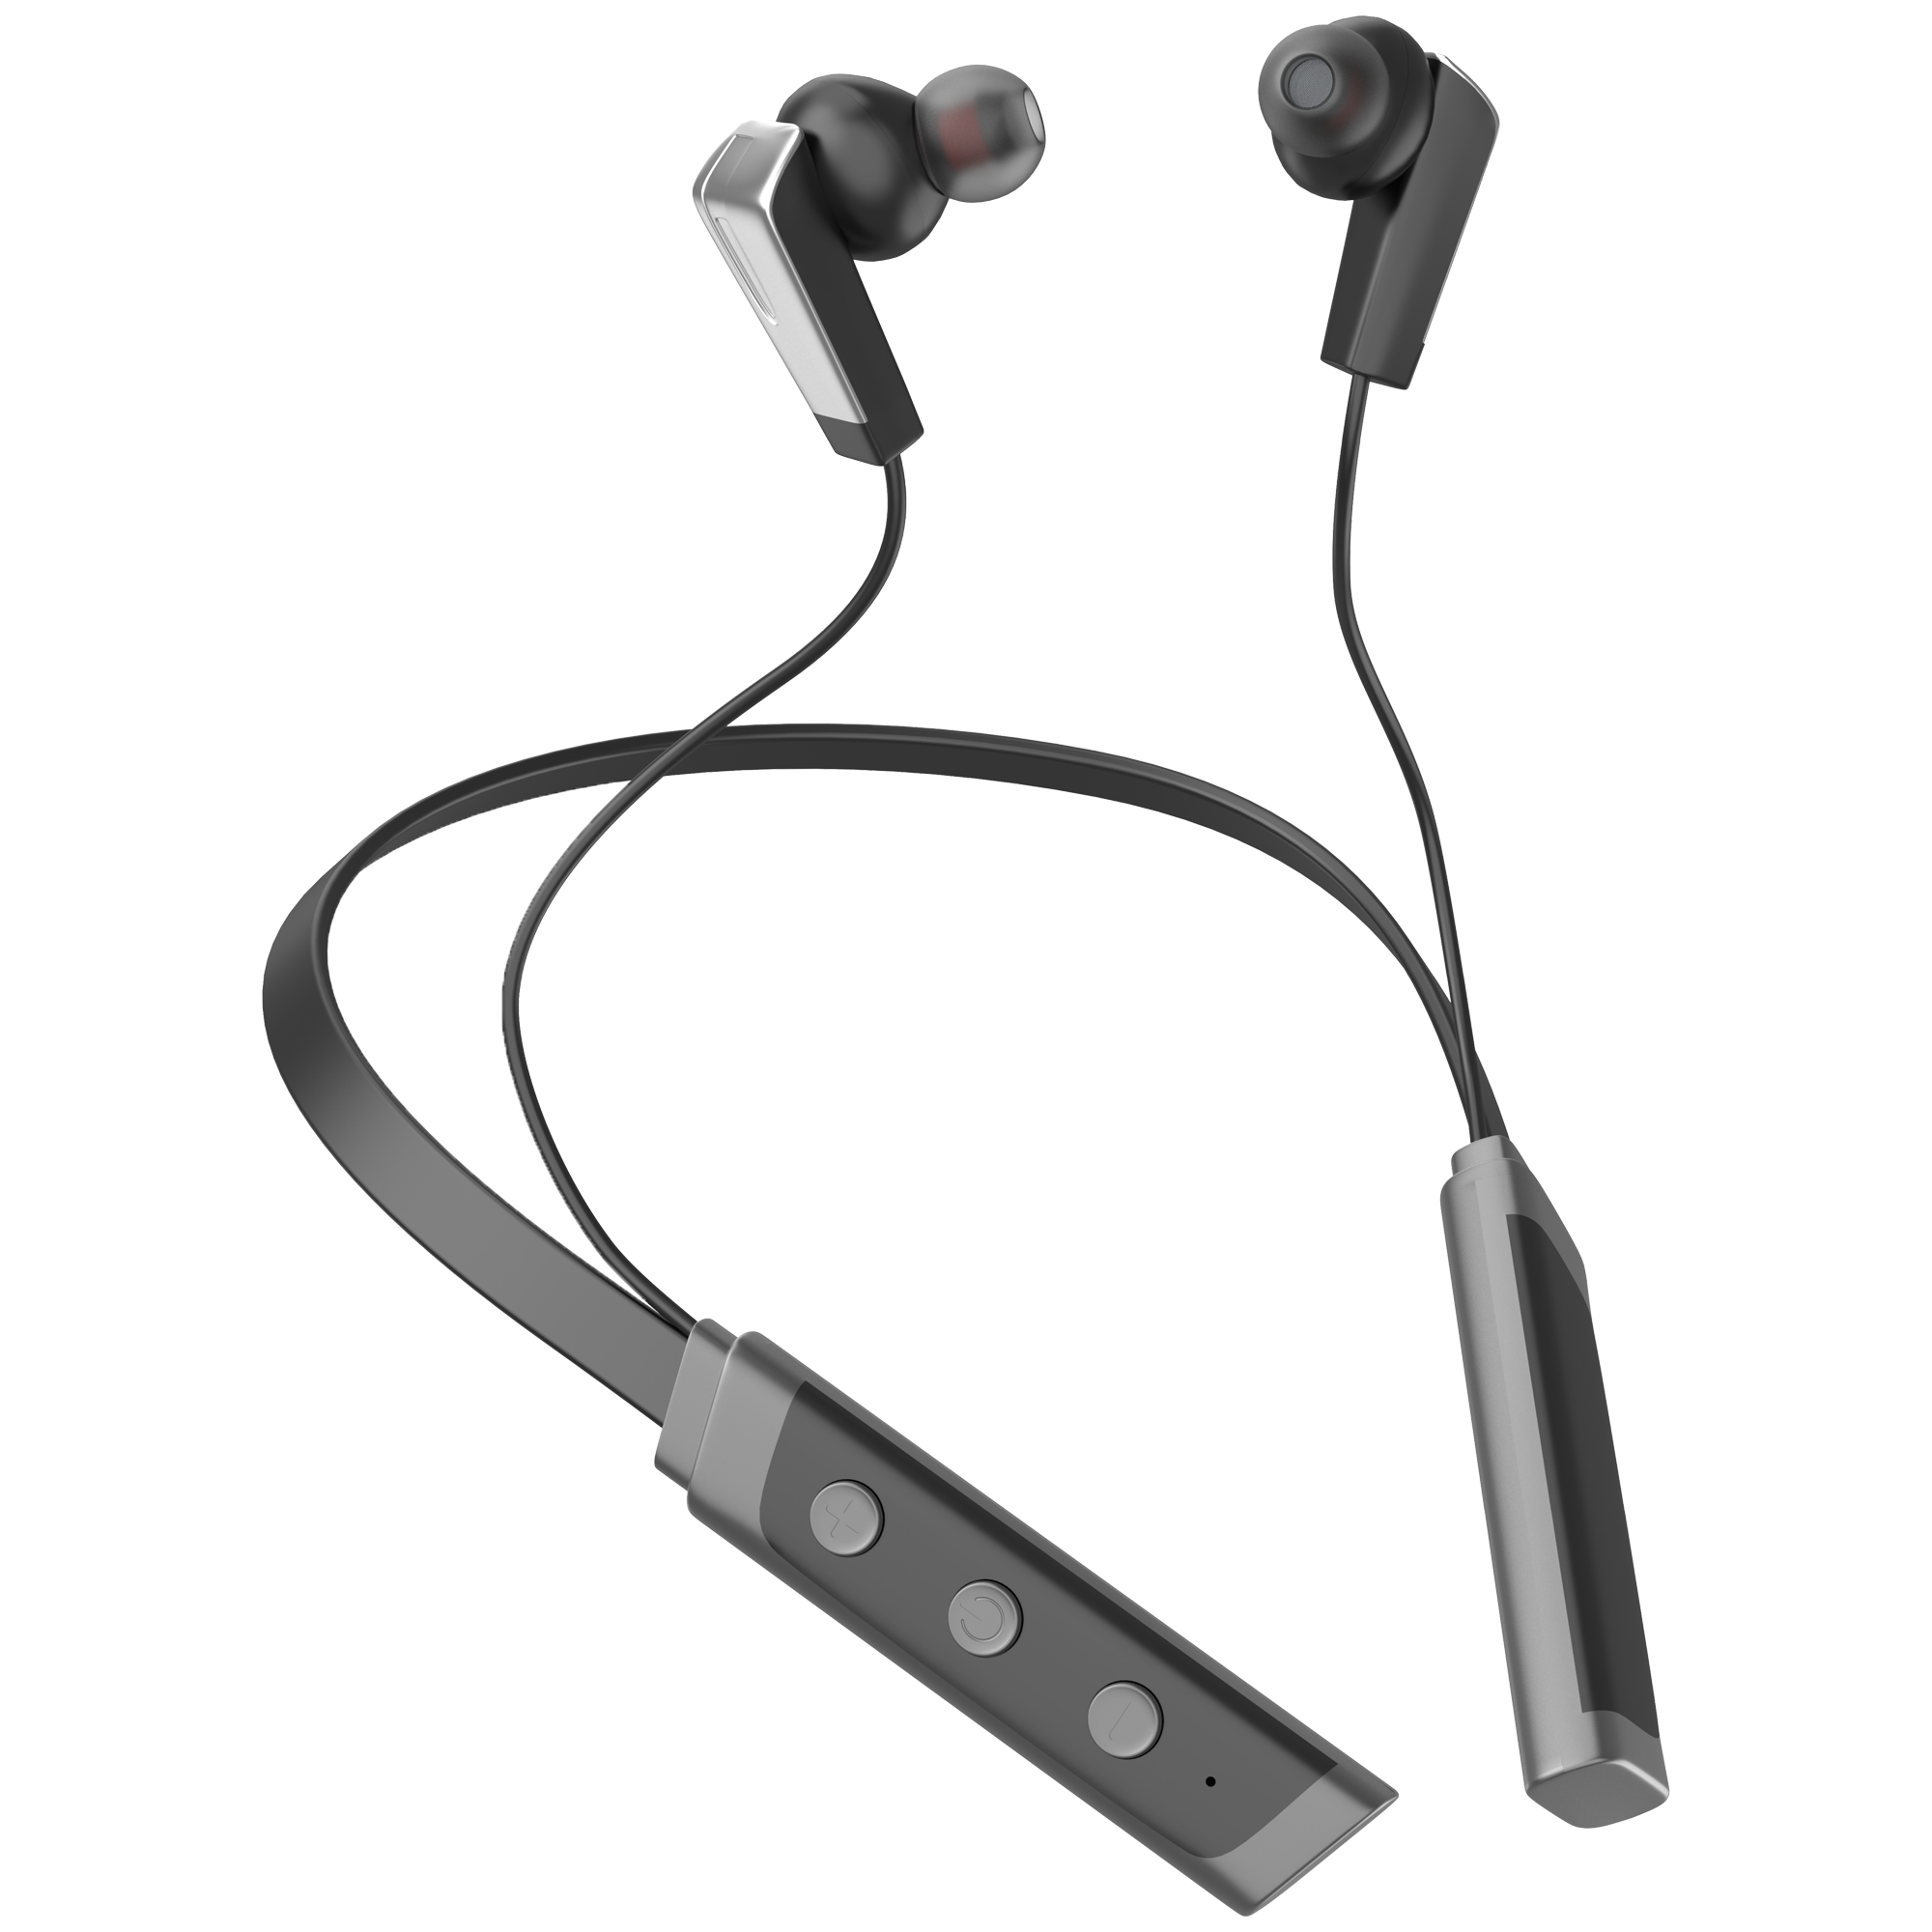 Zusix ZXD-06 with 22 Hours Music Time In-Ear Wireless Neckband v5.0 Bluetooth Headset